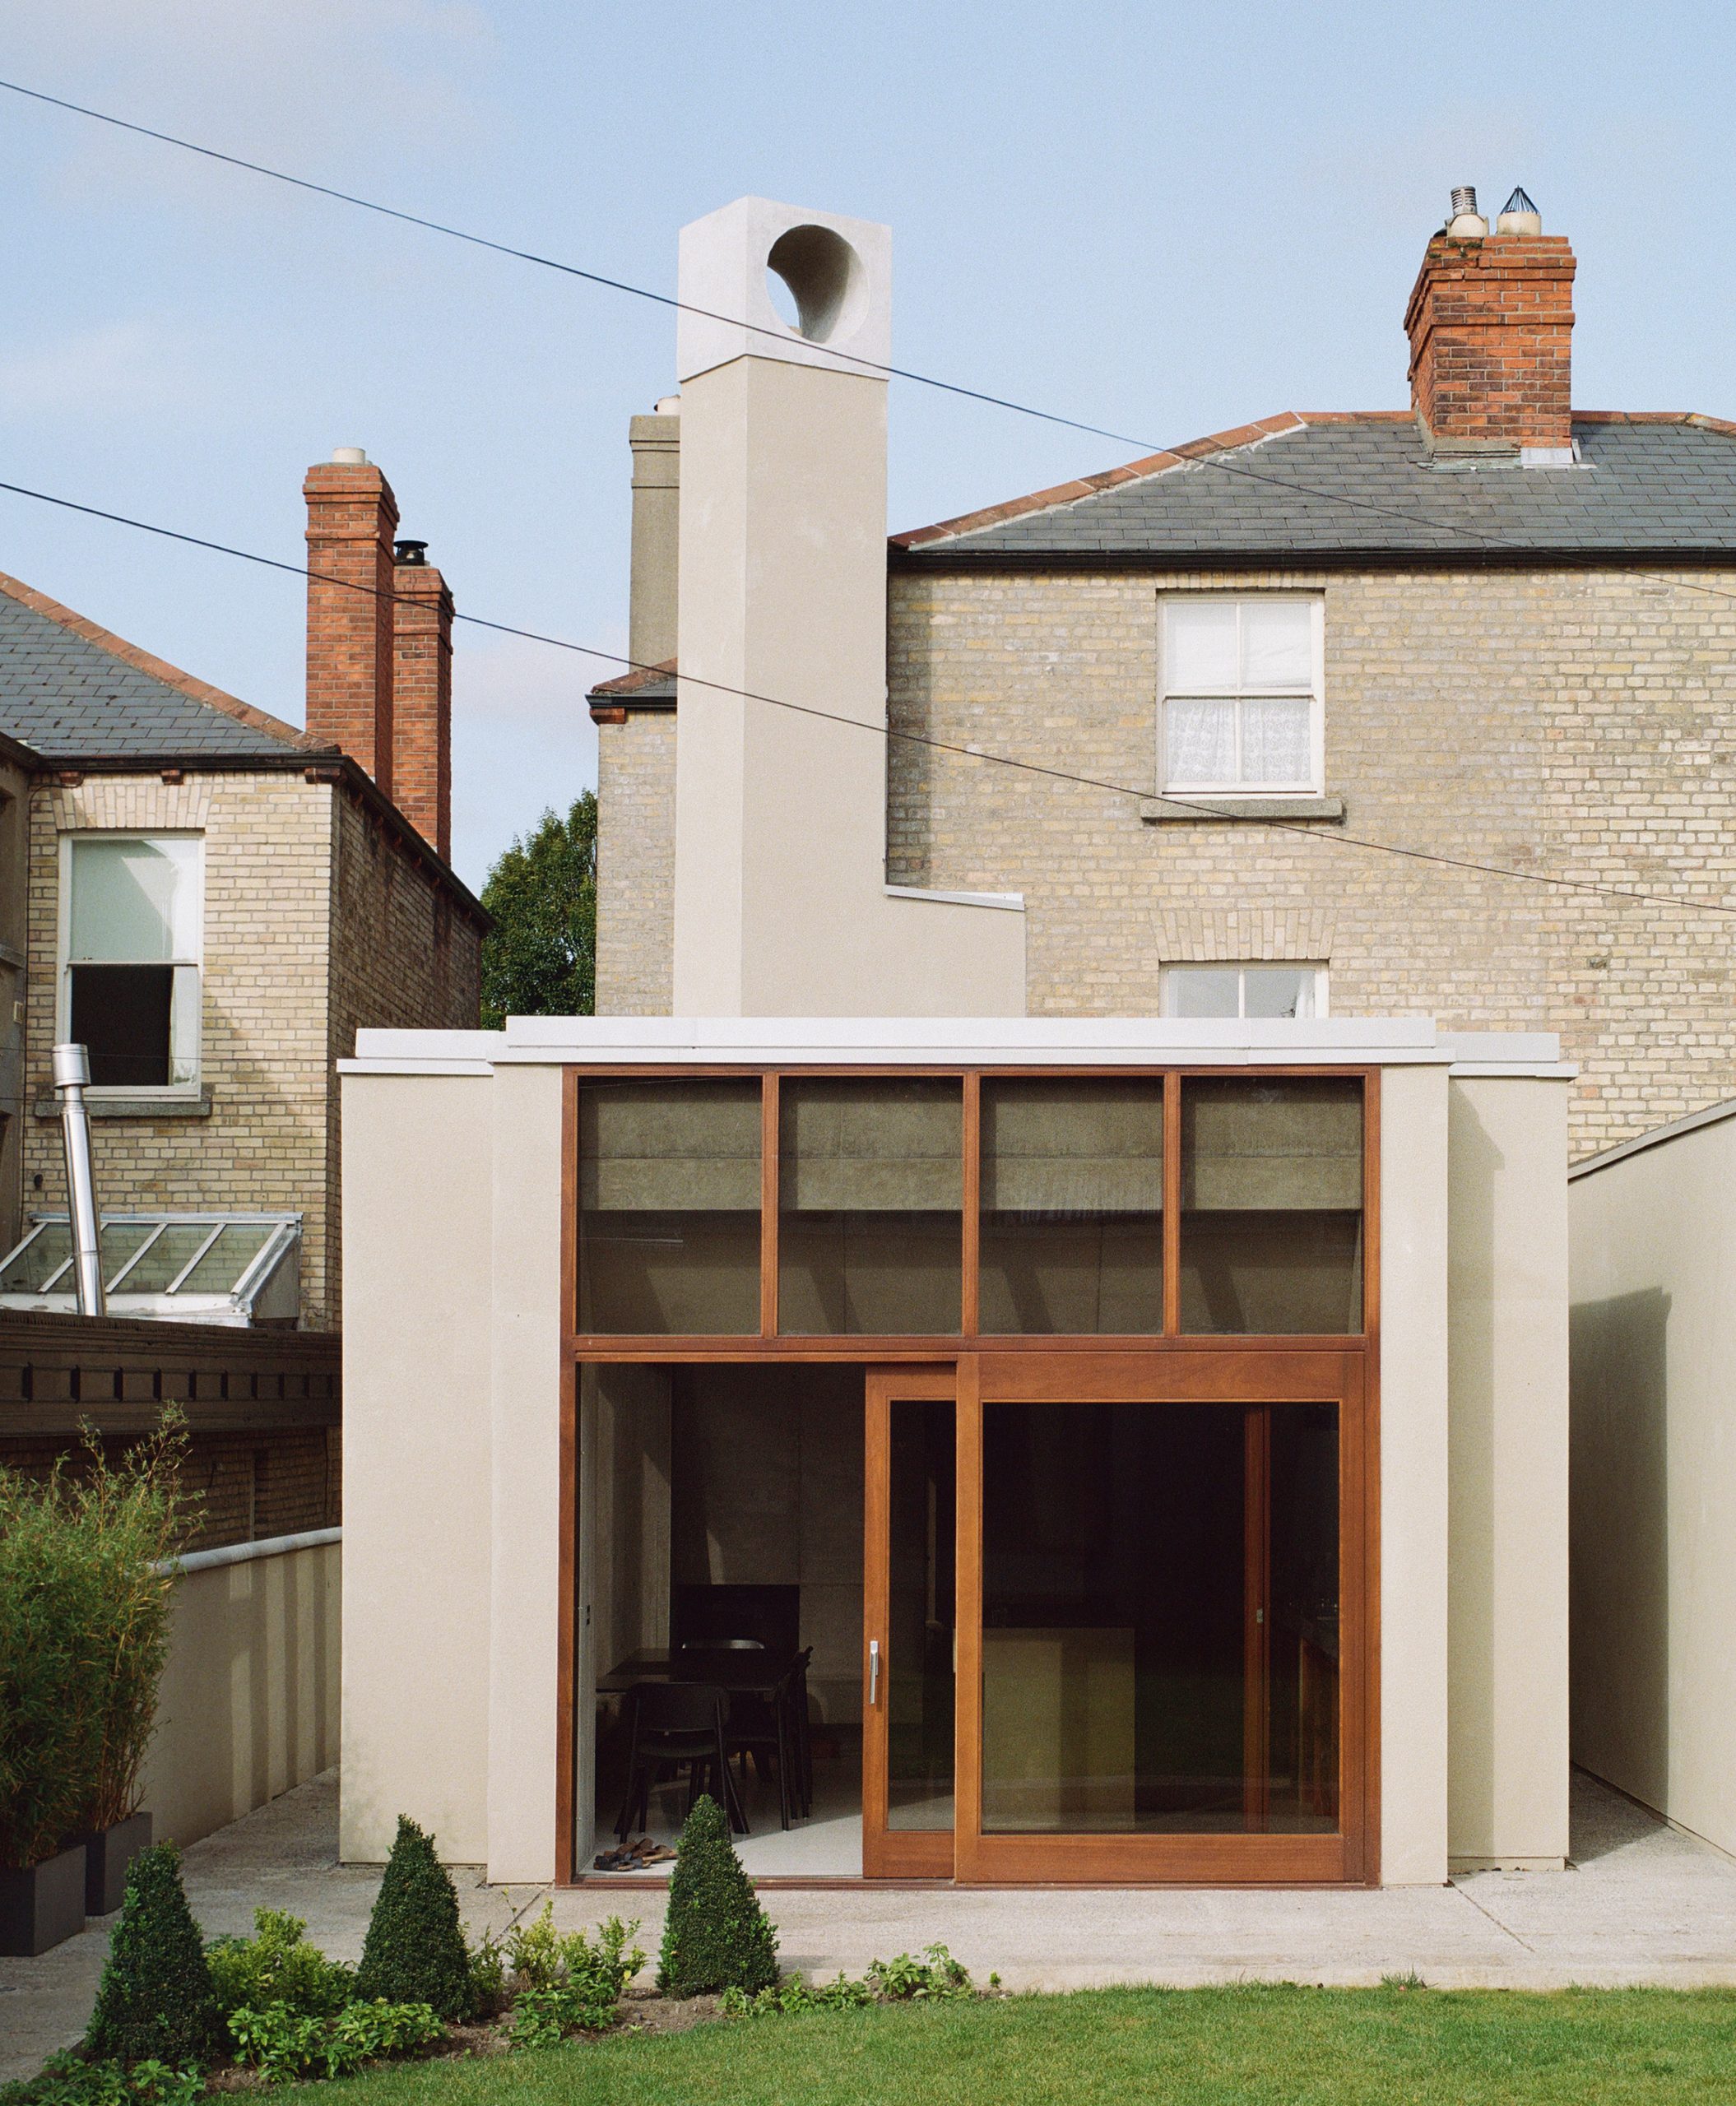 The rendered exterior of the Hollybrook Road extension by TOB Architect